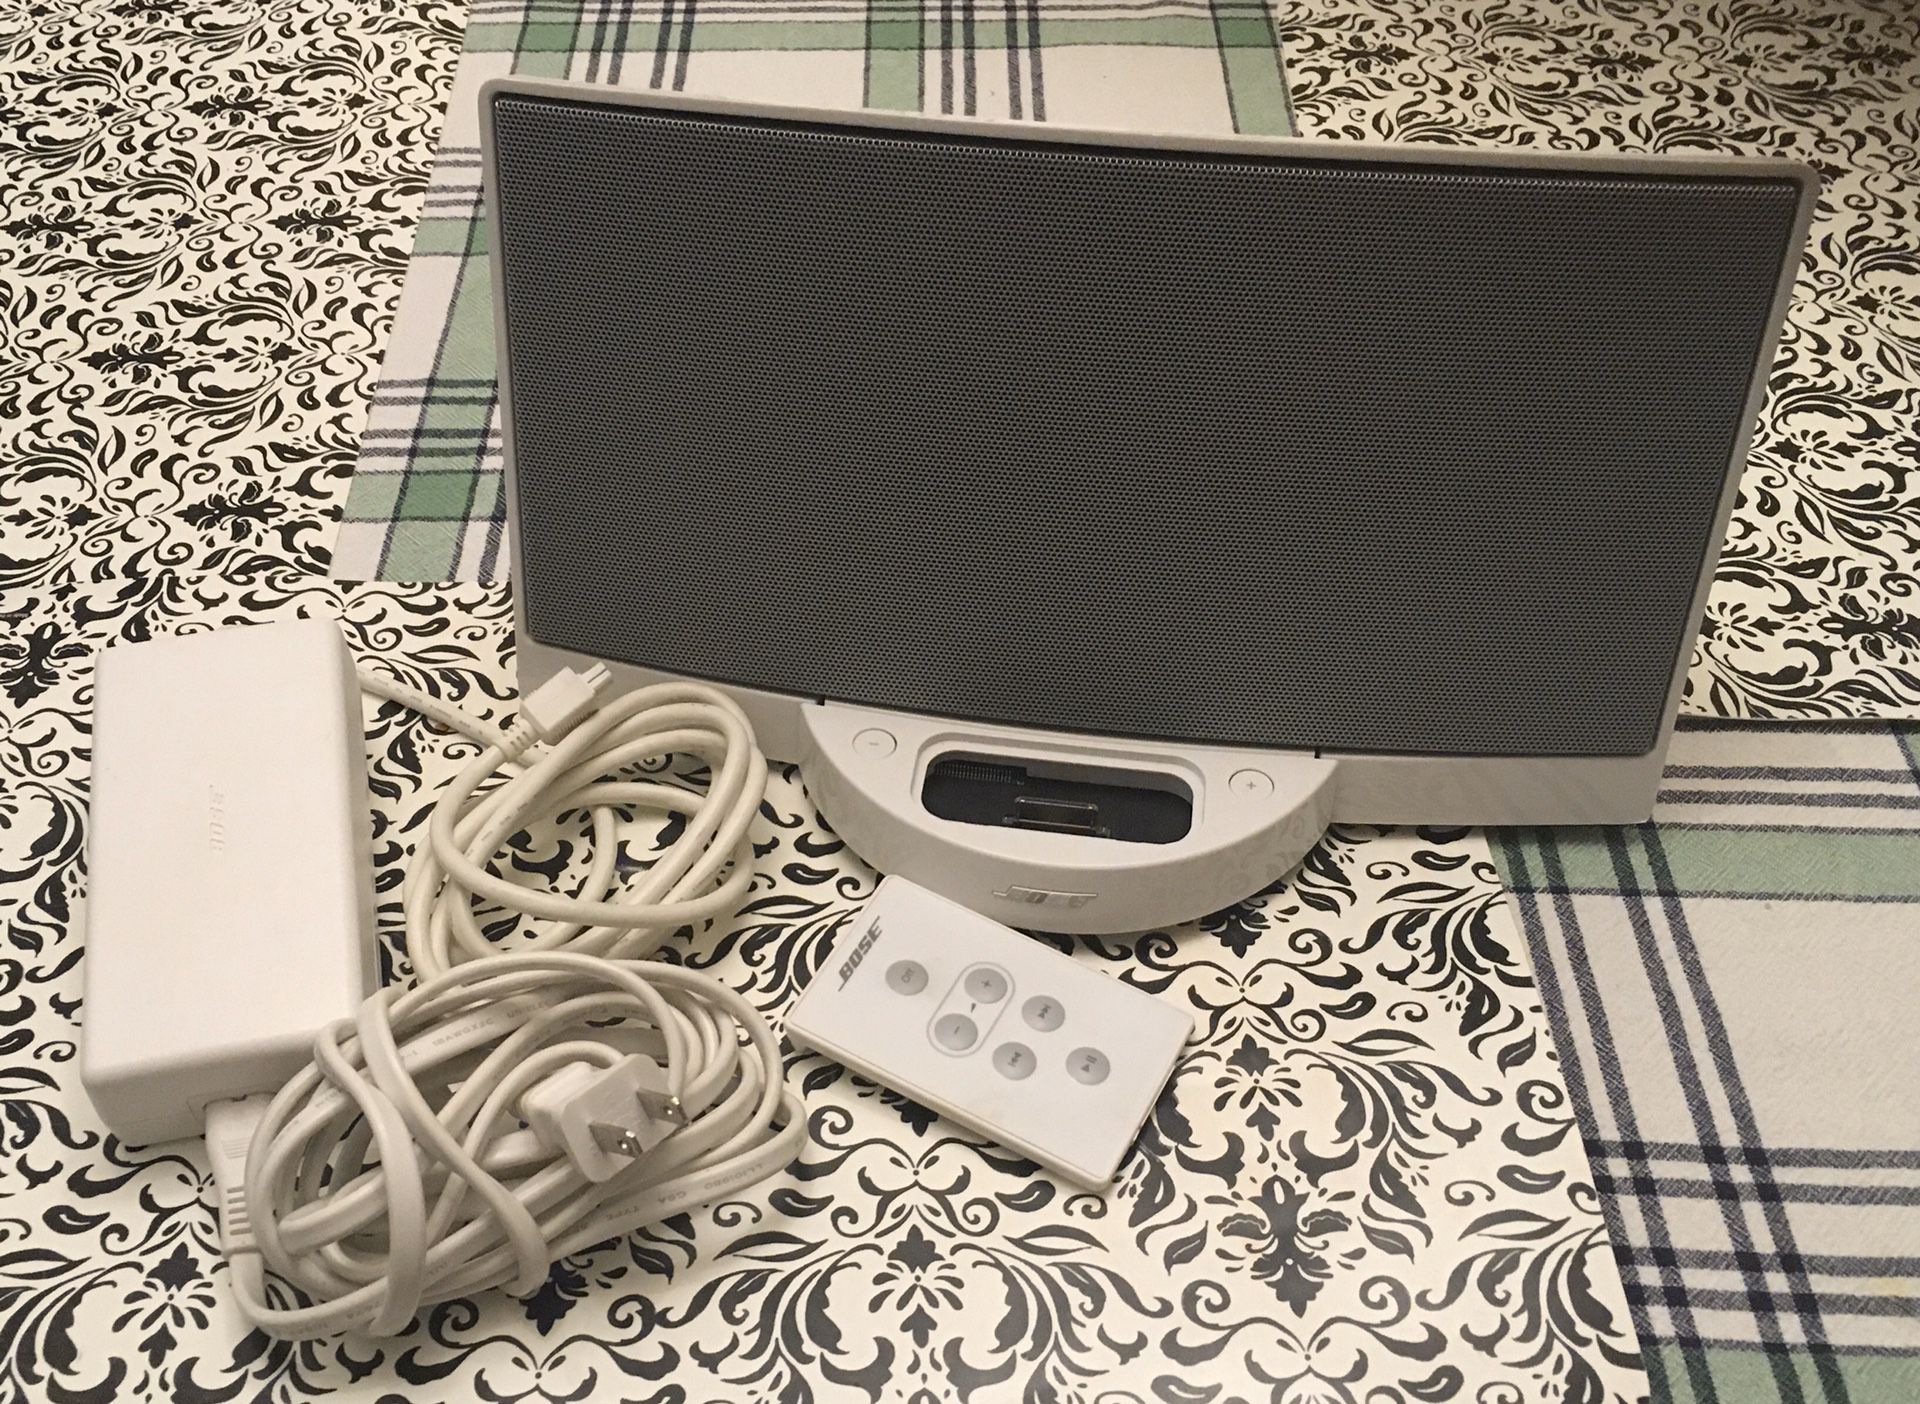 Bose Sounddock Digital Music System Speaker white W/ power cord and controller